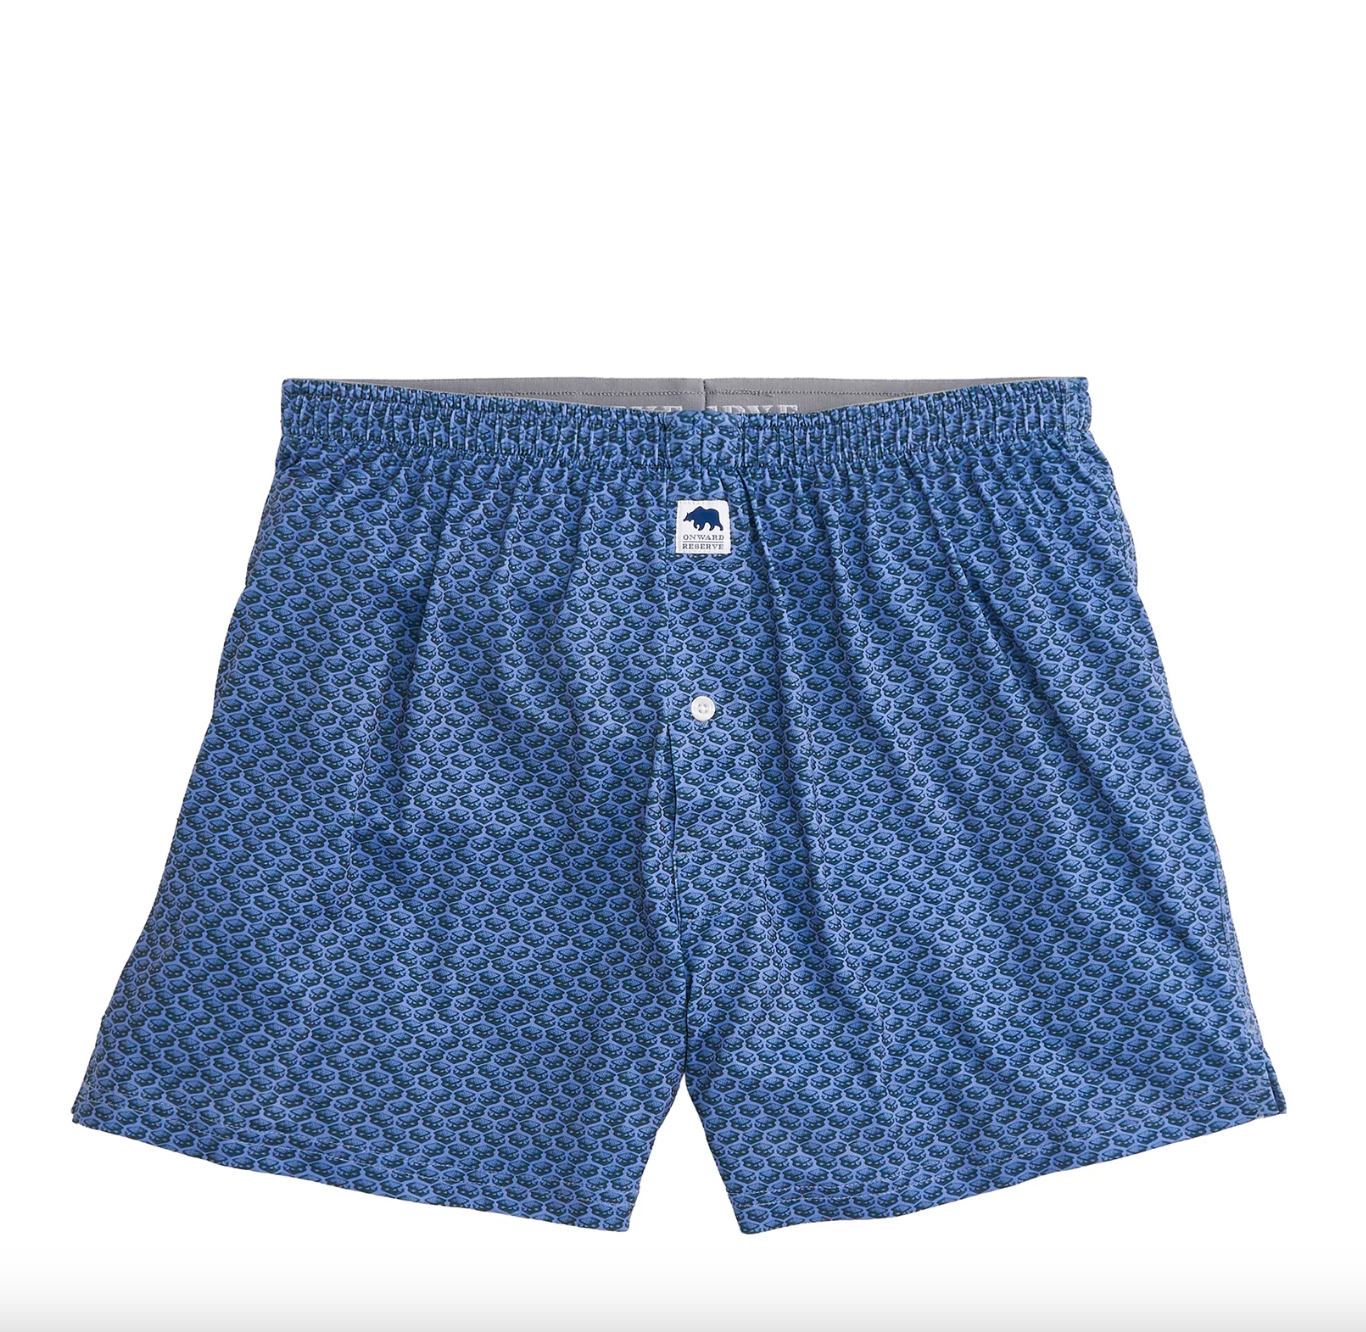 S'mores Performance Boxers